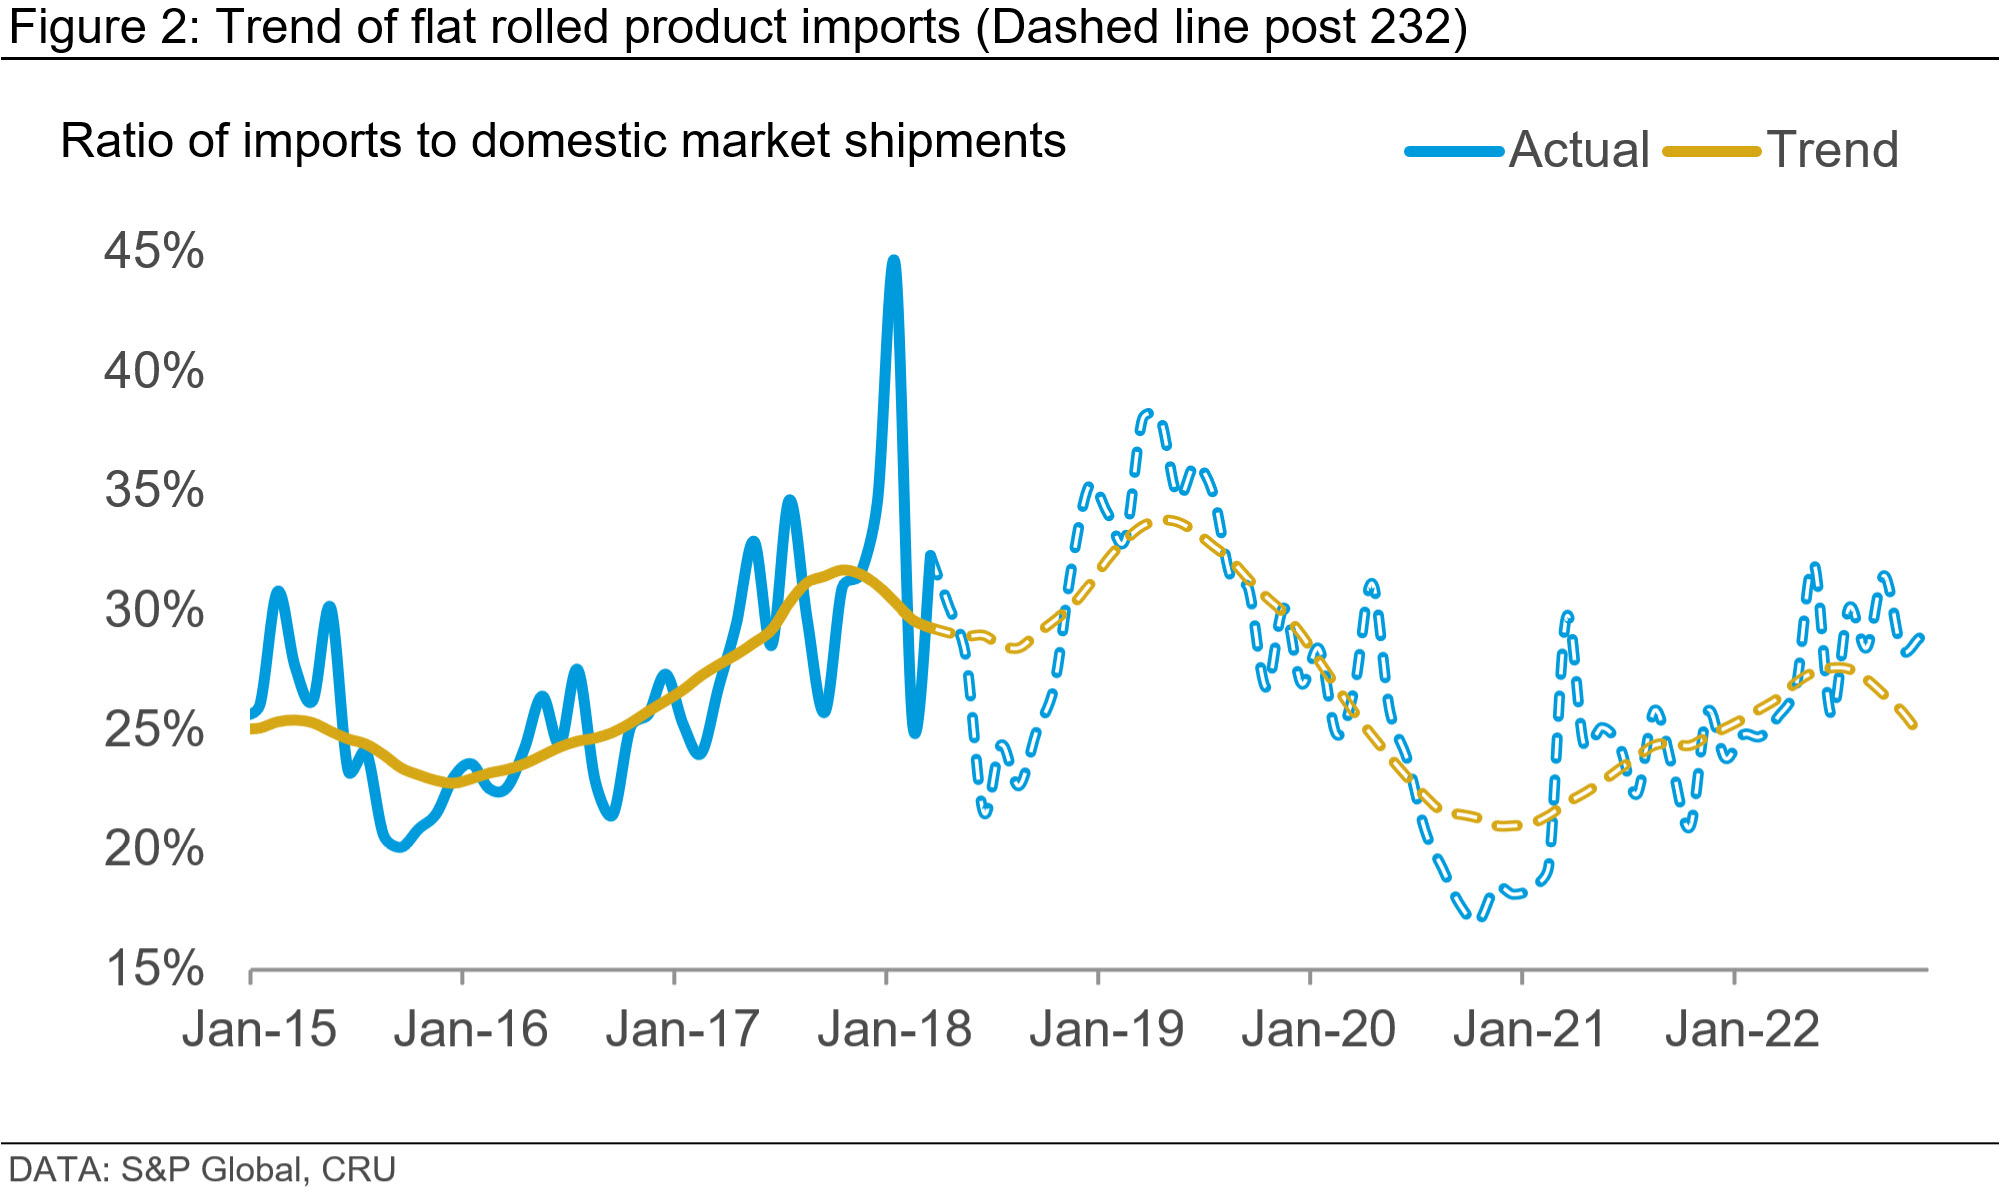 Graph showing the trend of flat rolled product imports